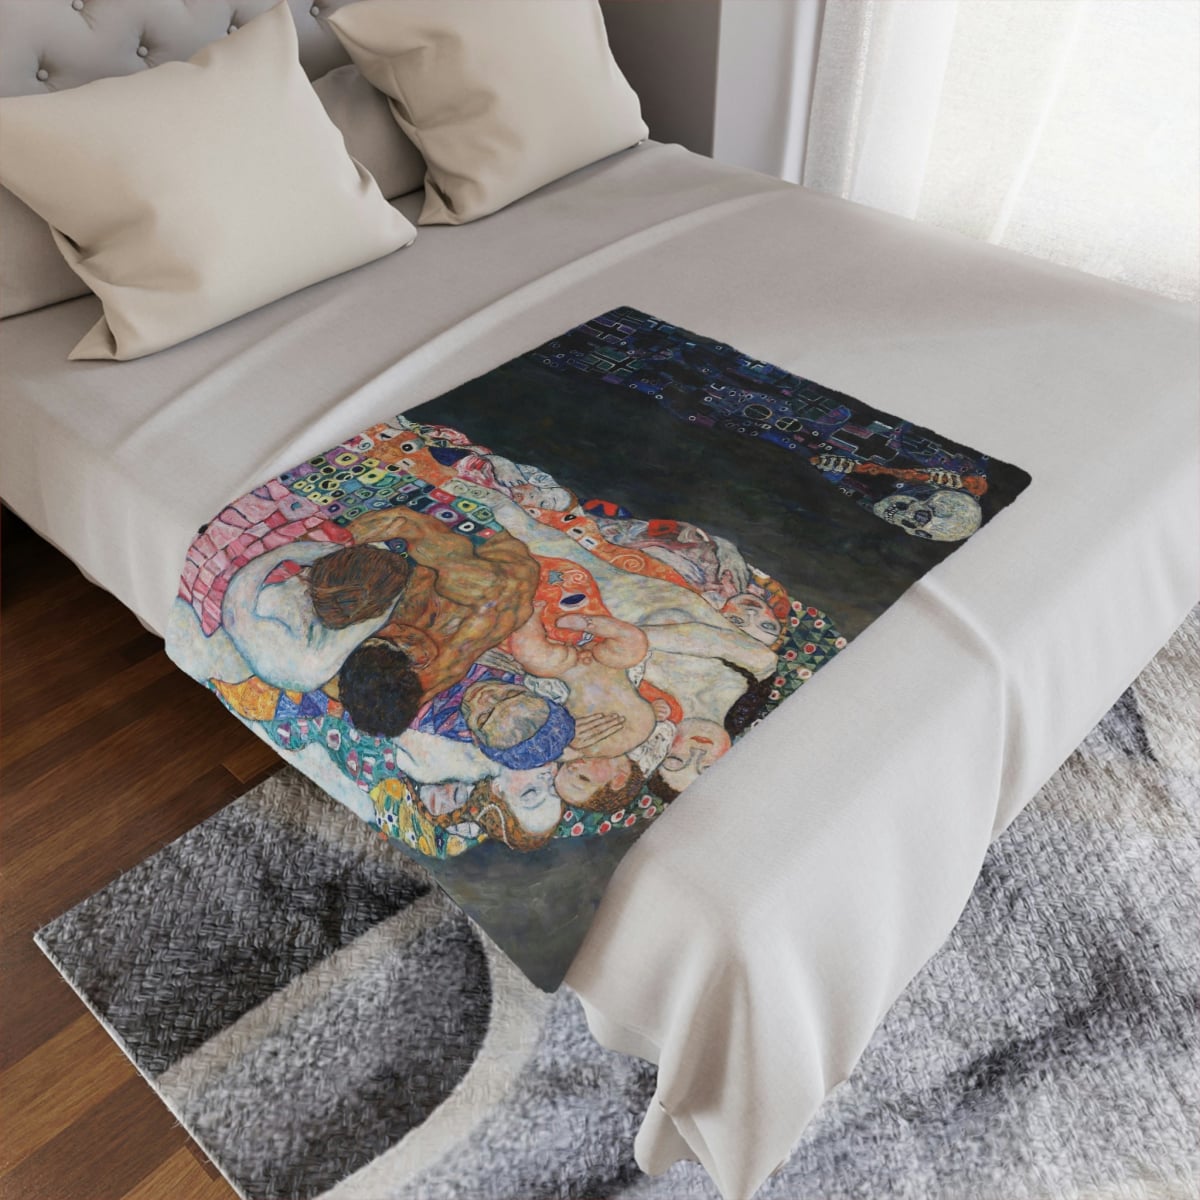 High-resolution Klimt art reproduction on a luxurious blanket